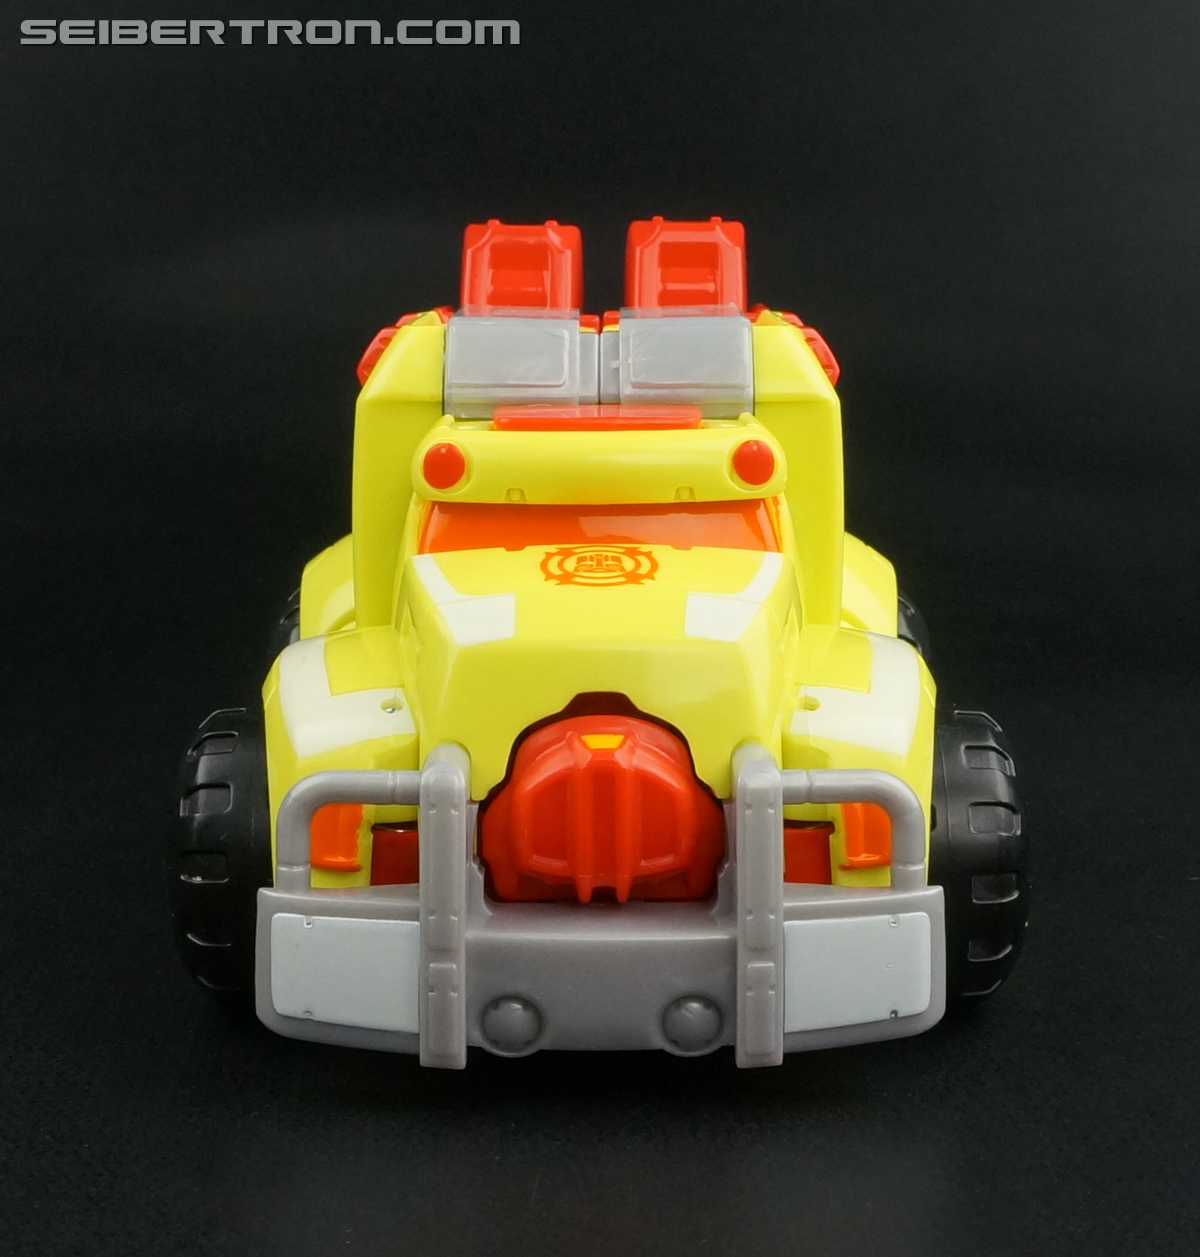 Transformers Rescue Bots Heatwave the Fire-Bot (Image #1 of 61)